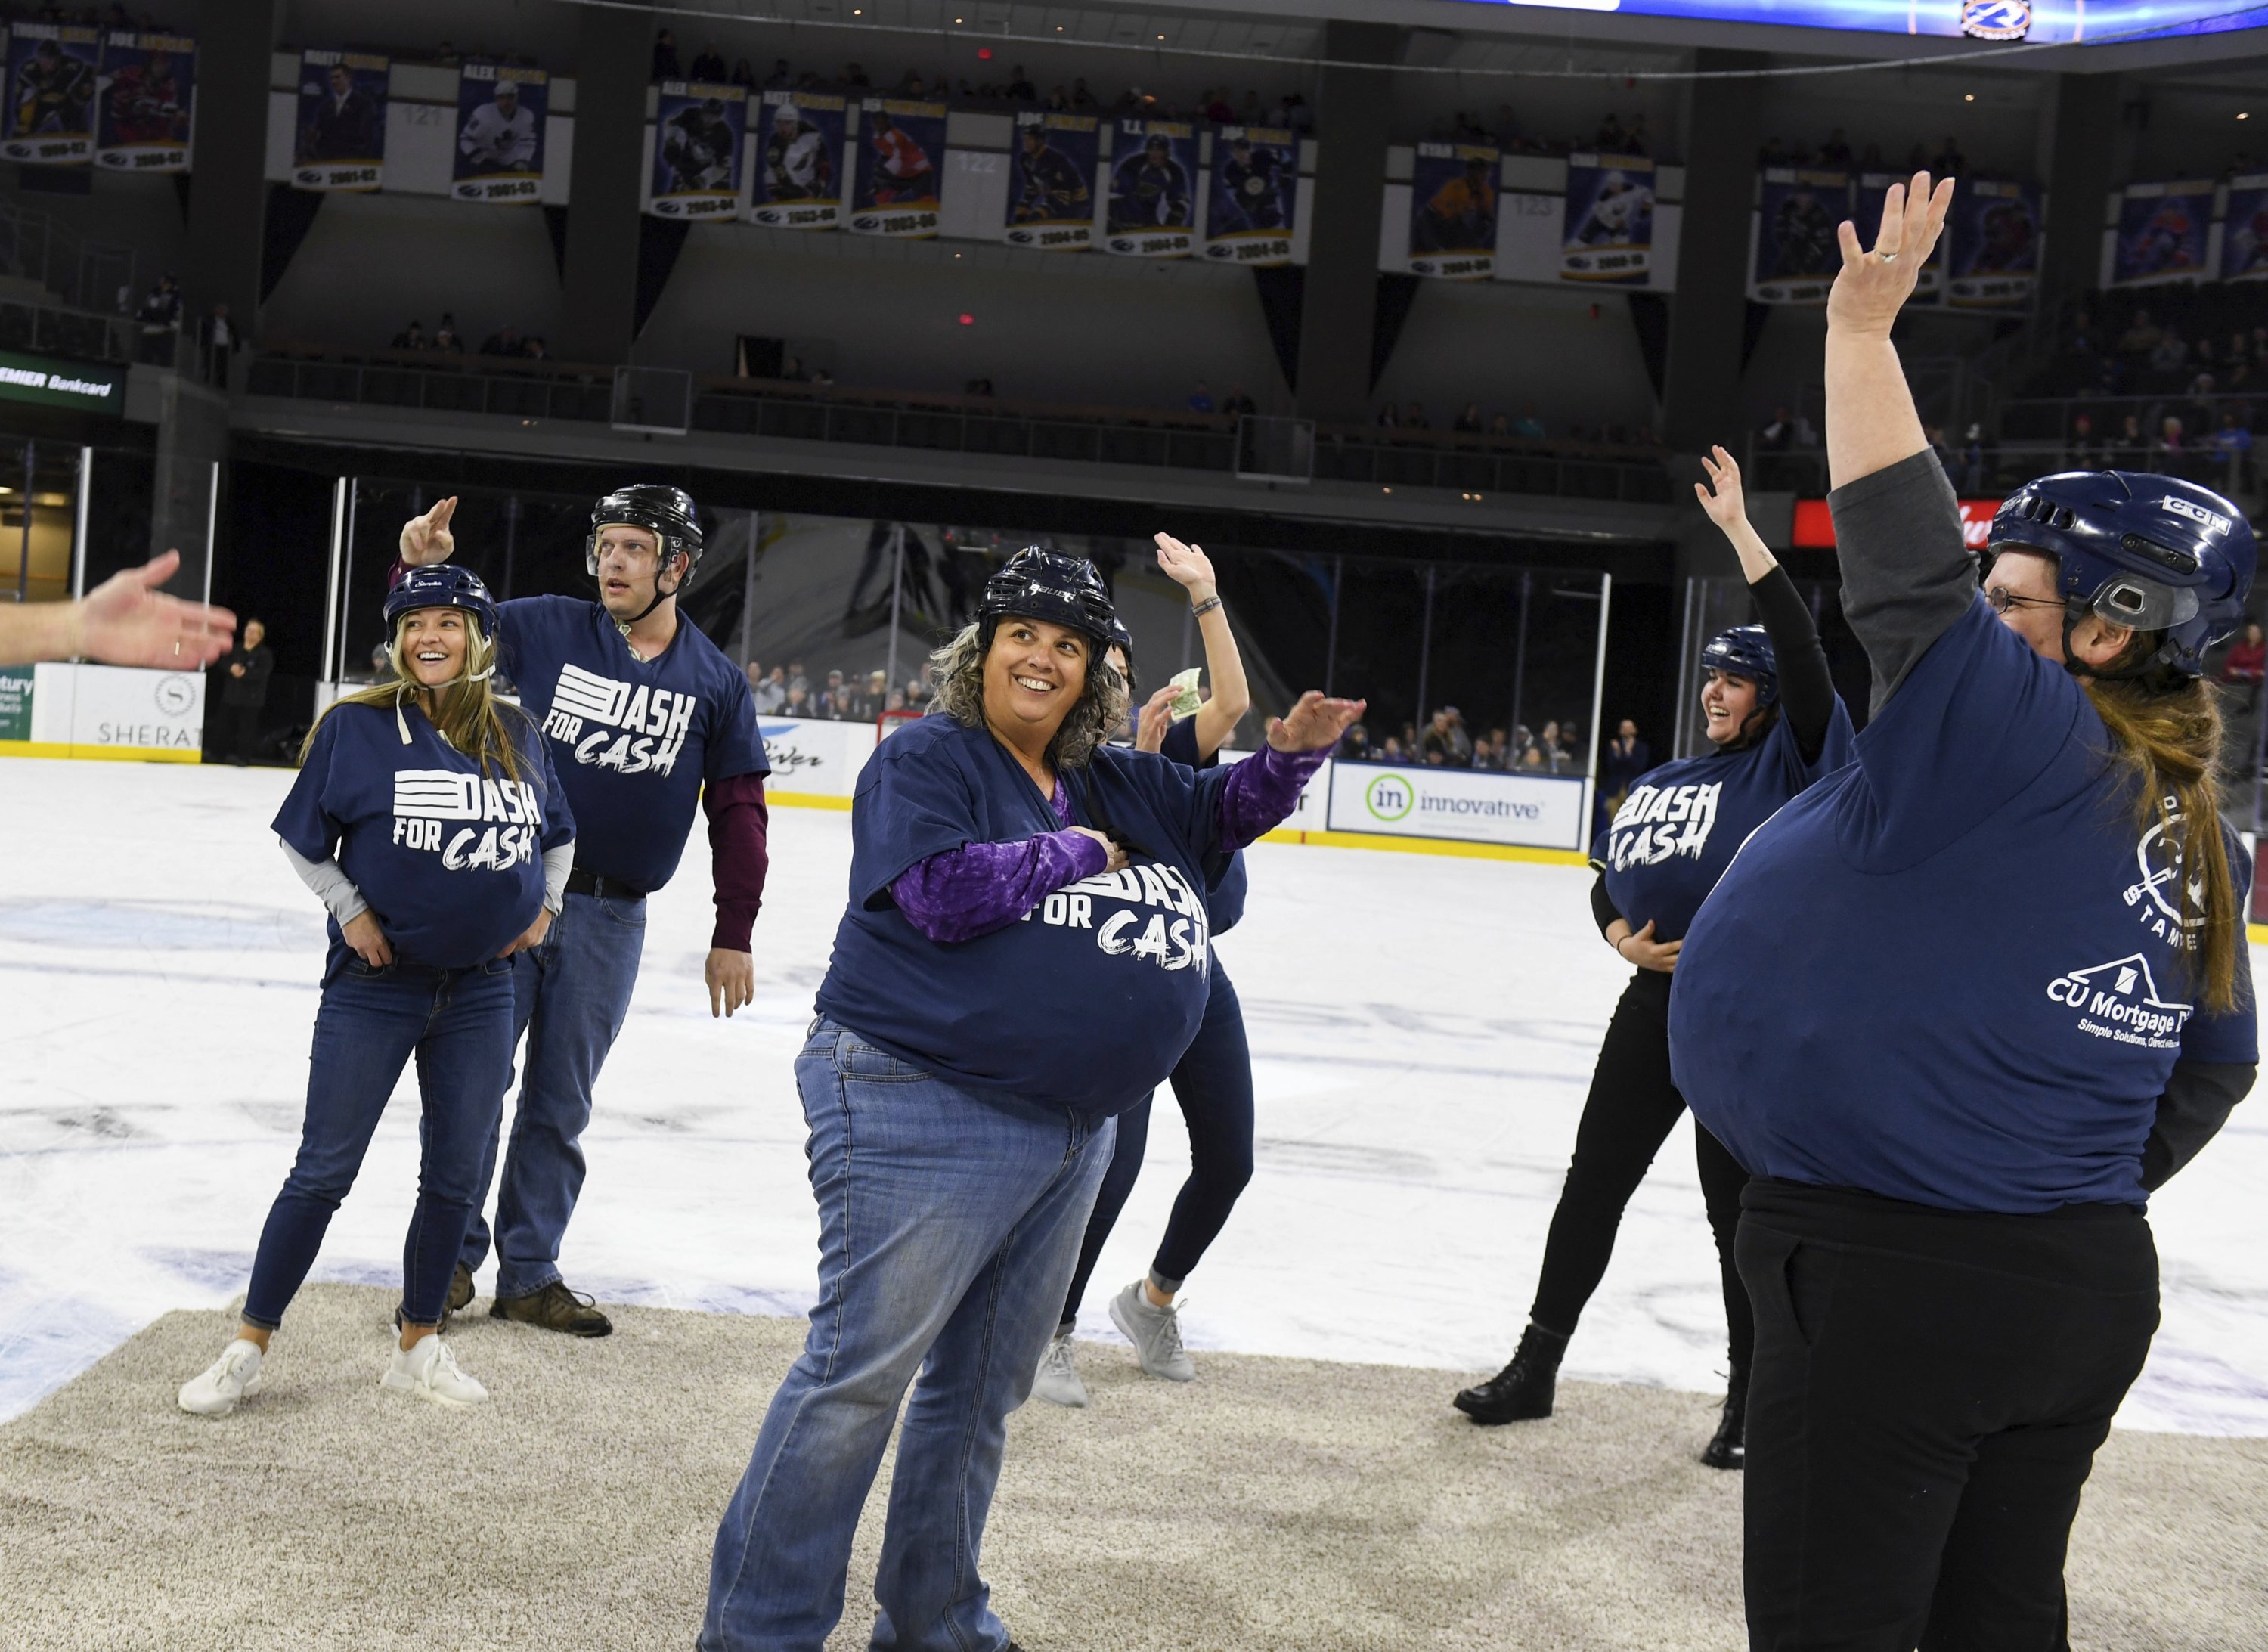 Local teachers wave to the crowd while holding piles of money in their shirts in the first-ever Dash For Cash between periods at the Sioux Falls Stampede game, South Dakota, U.S., Dec. 11, 2021. (AP Photo)